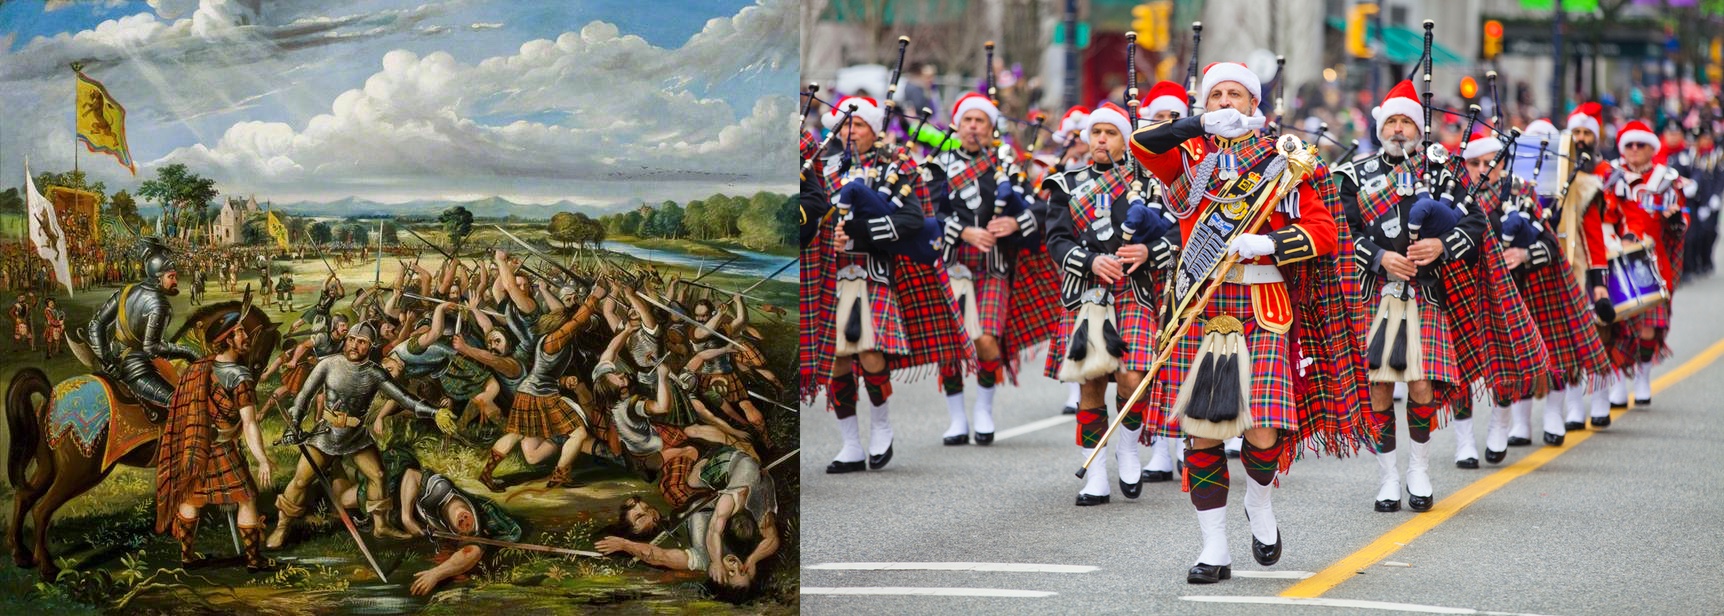 A painting of the Battle of the Clans in 1396 in Perth, Scotland, paired with a picture of marchers in kilts at the 2017 Santa Claus parade in Vancouver, Canada